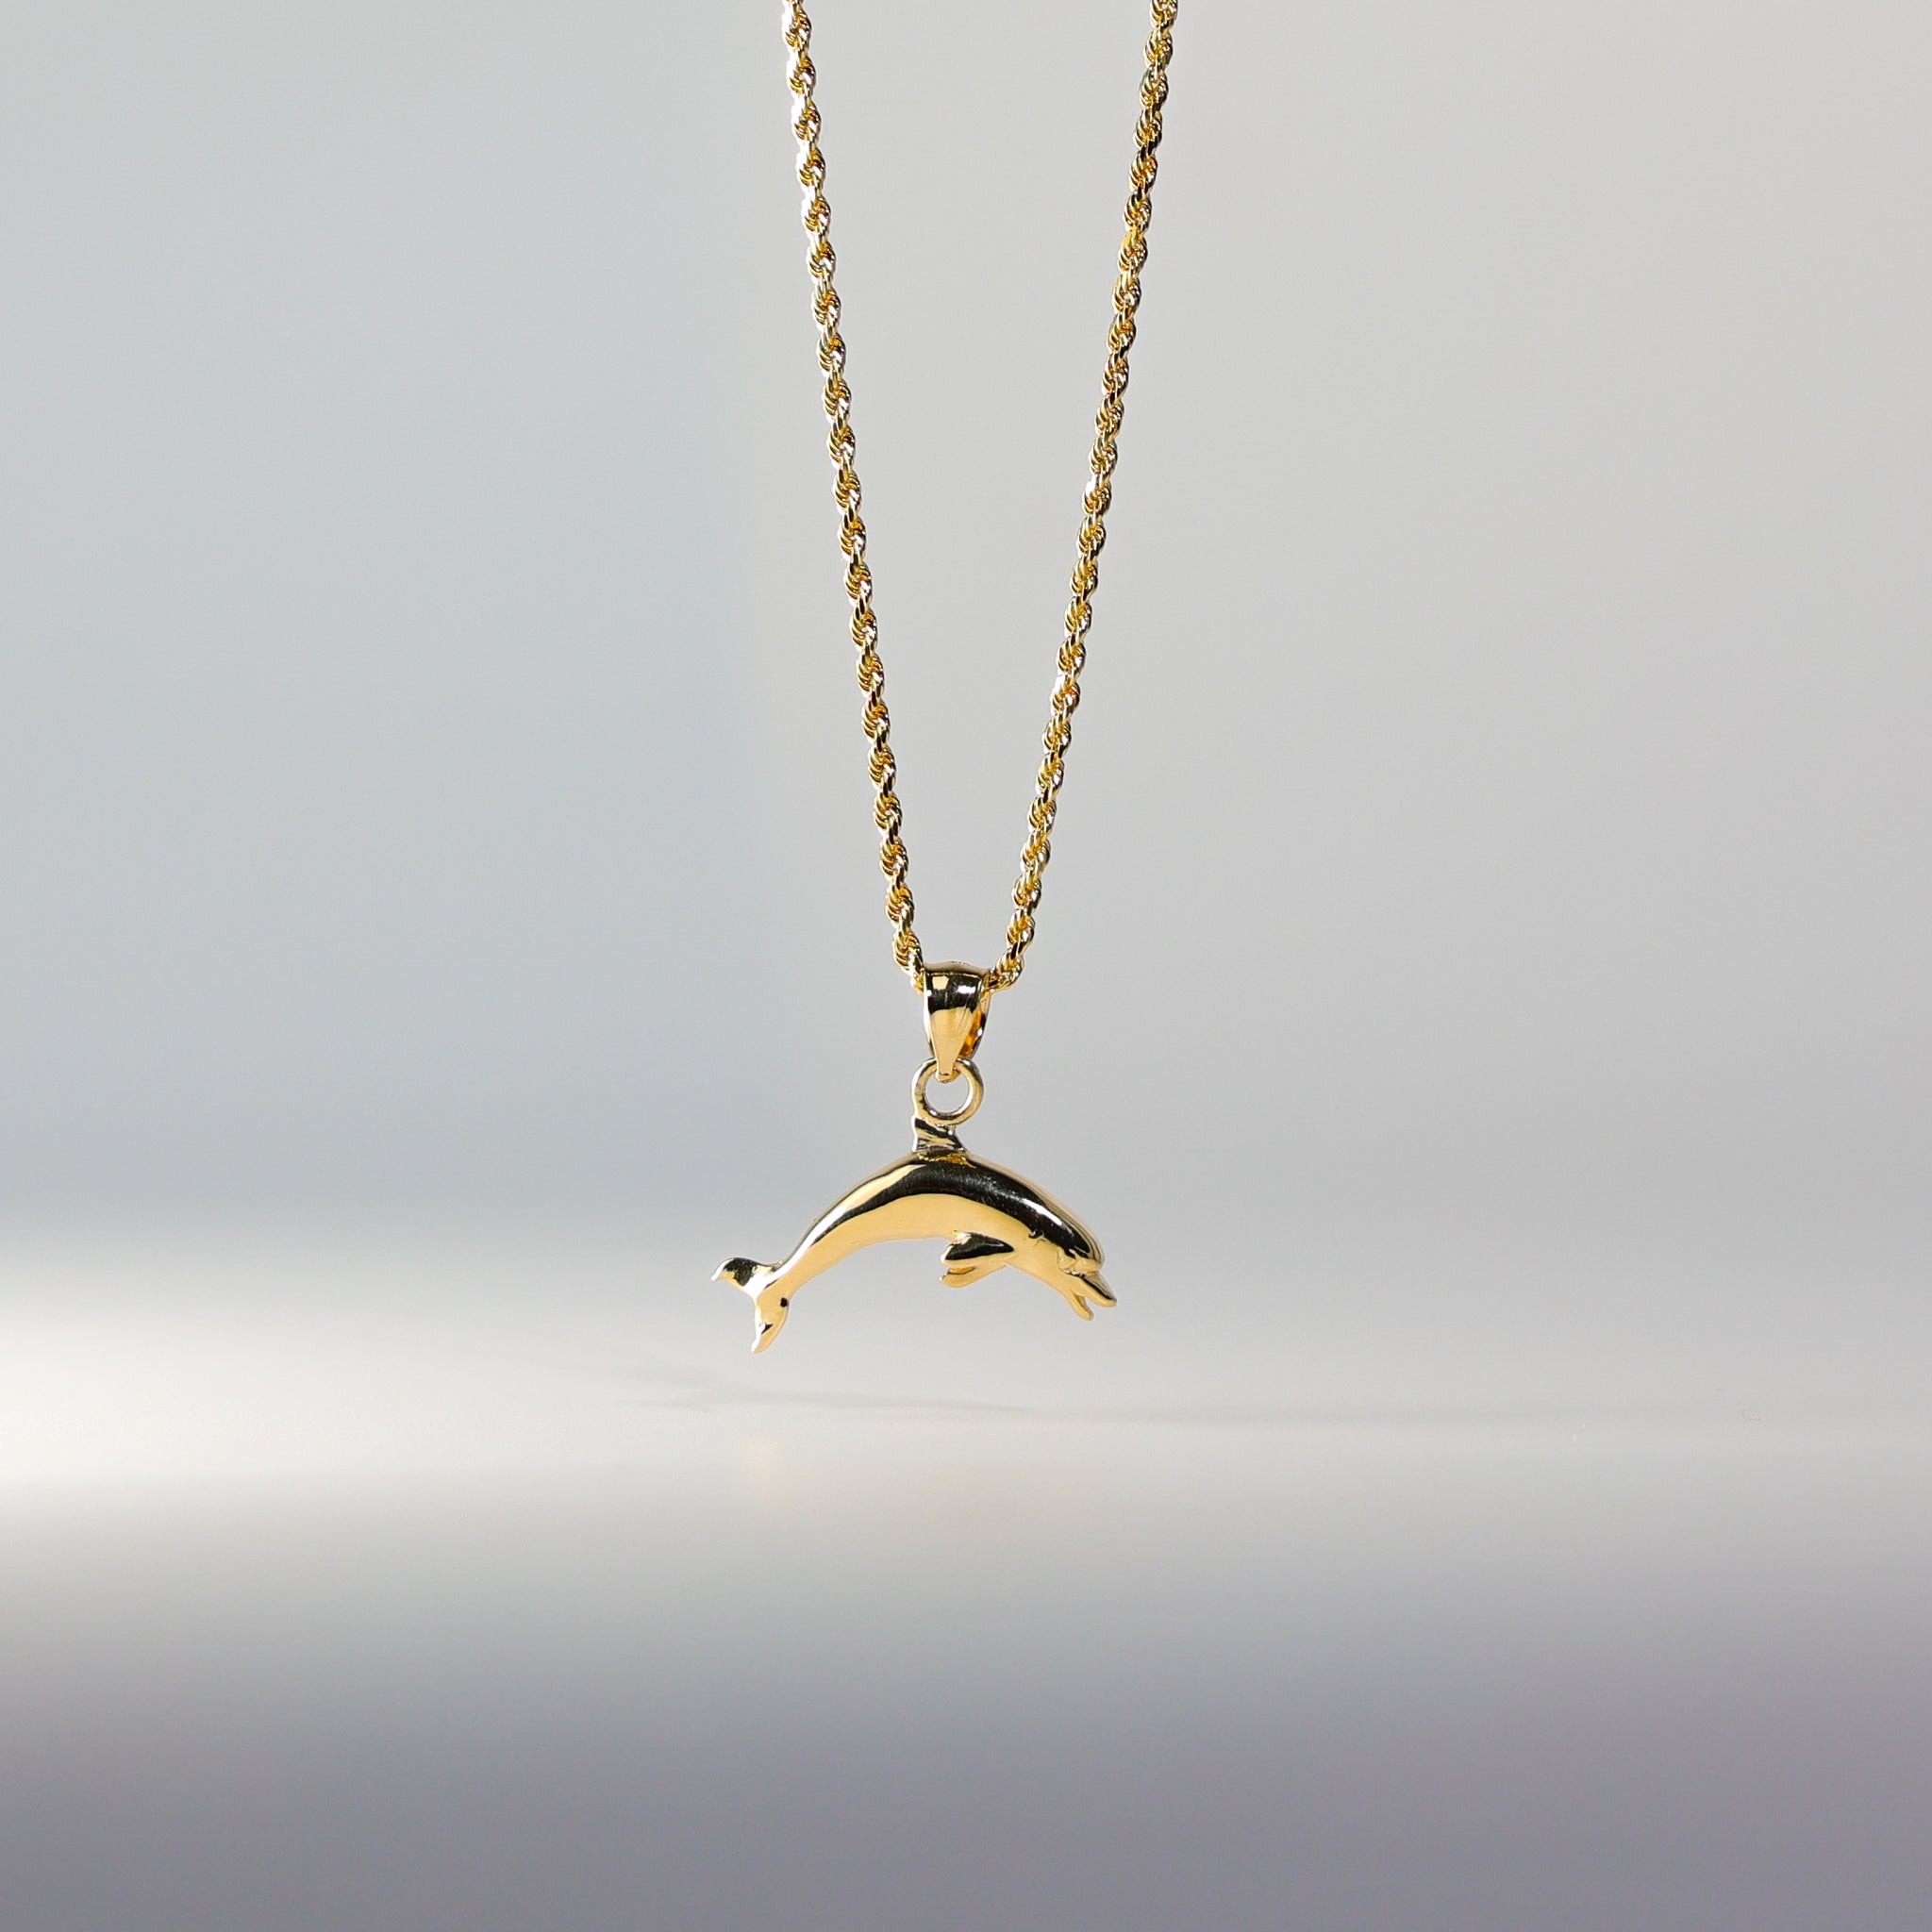 Gold Dolphin Pendant Model-1669 - Charlie & Co. Jewelry